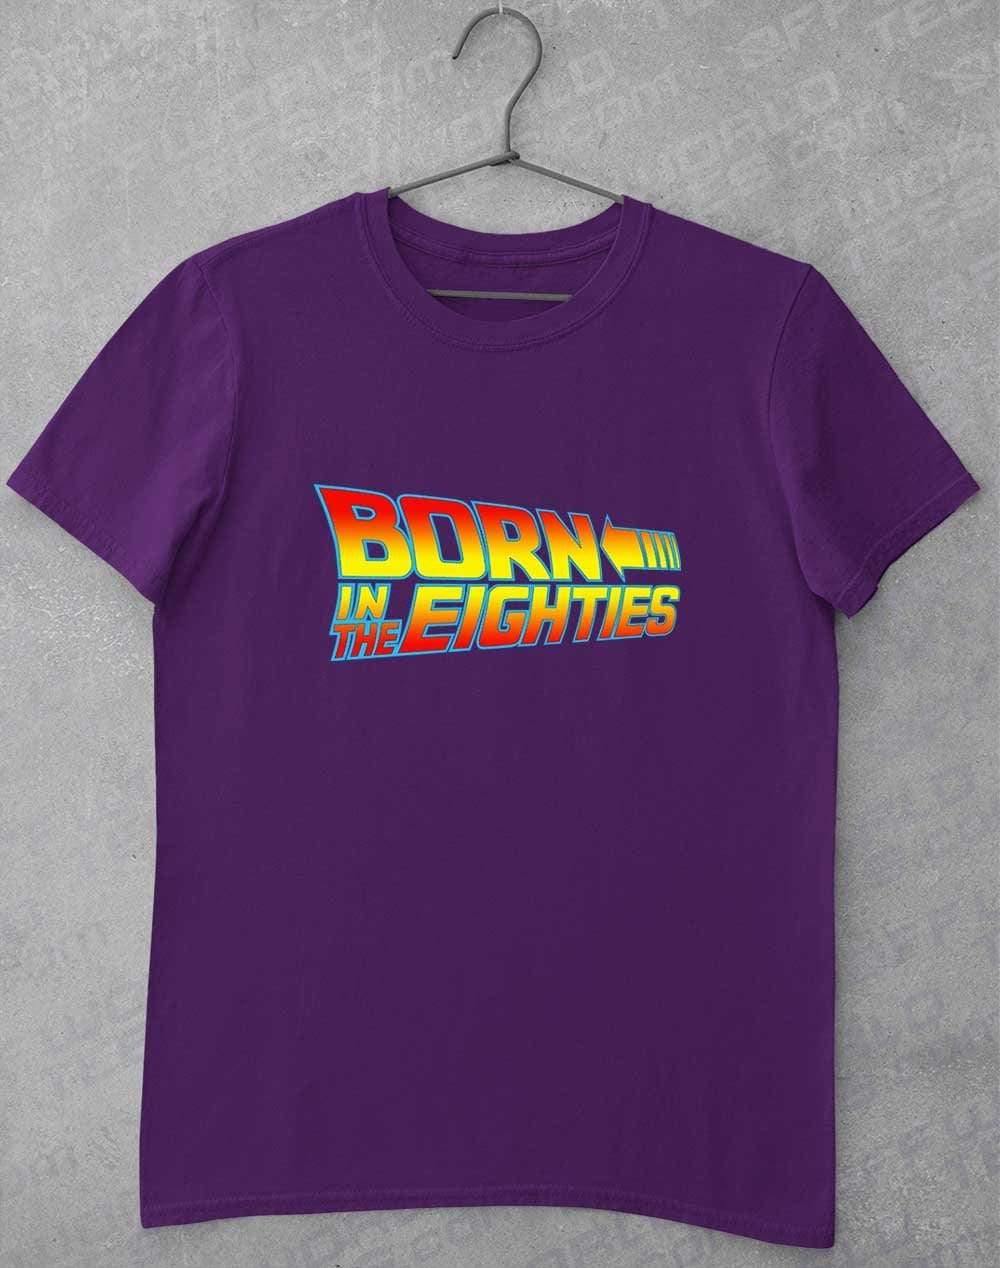 Born in the... (CHOOSE YOUR DECADE!) T-shirt THE EIGHTIES - Purple / S  - Off World Tees